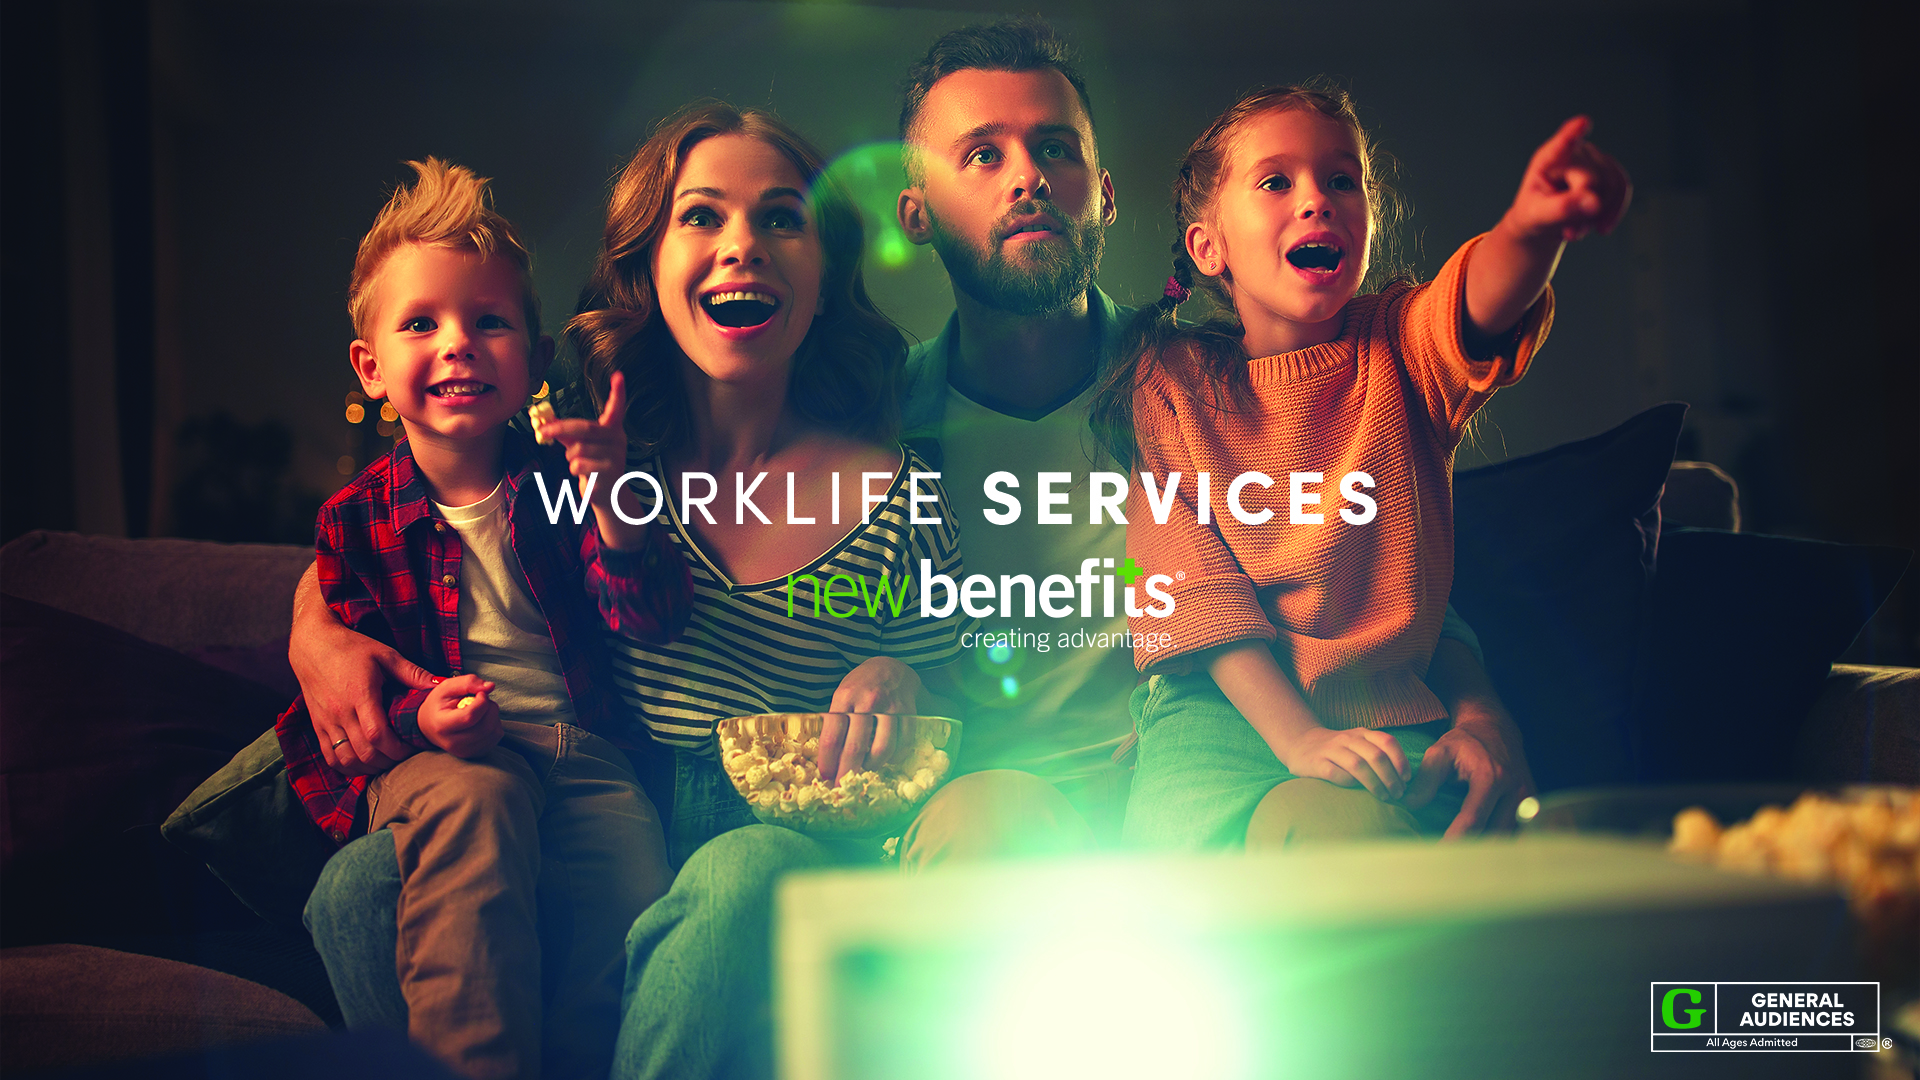 Mother, father, daughter, and son sitting close together on sofa behind projector in dark living room, eating popcorn, smiling, looking forward, Worklife Services, New Benefits logo, and "G" General Audiences rating superimposed